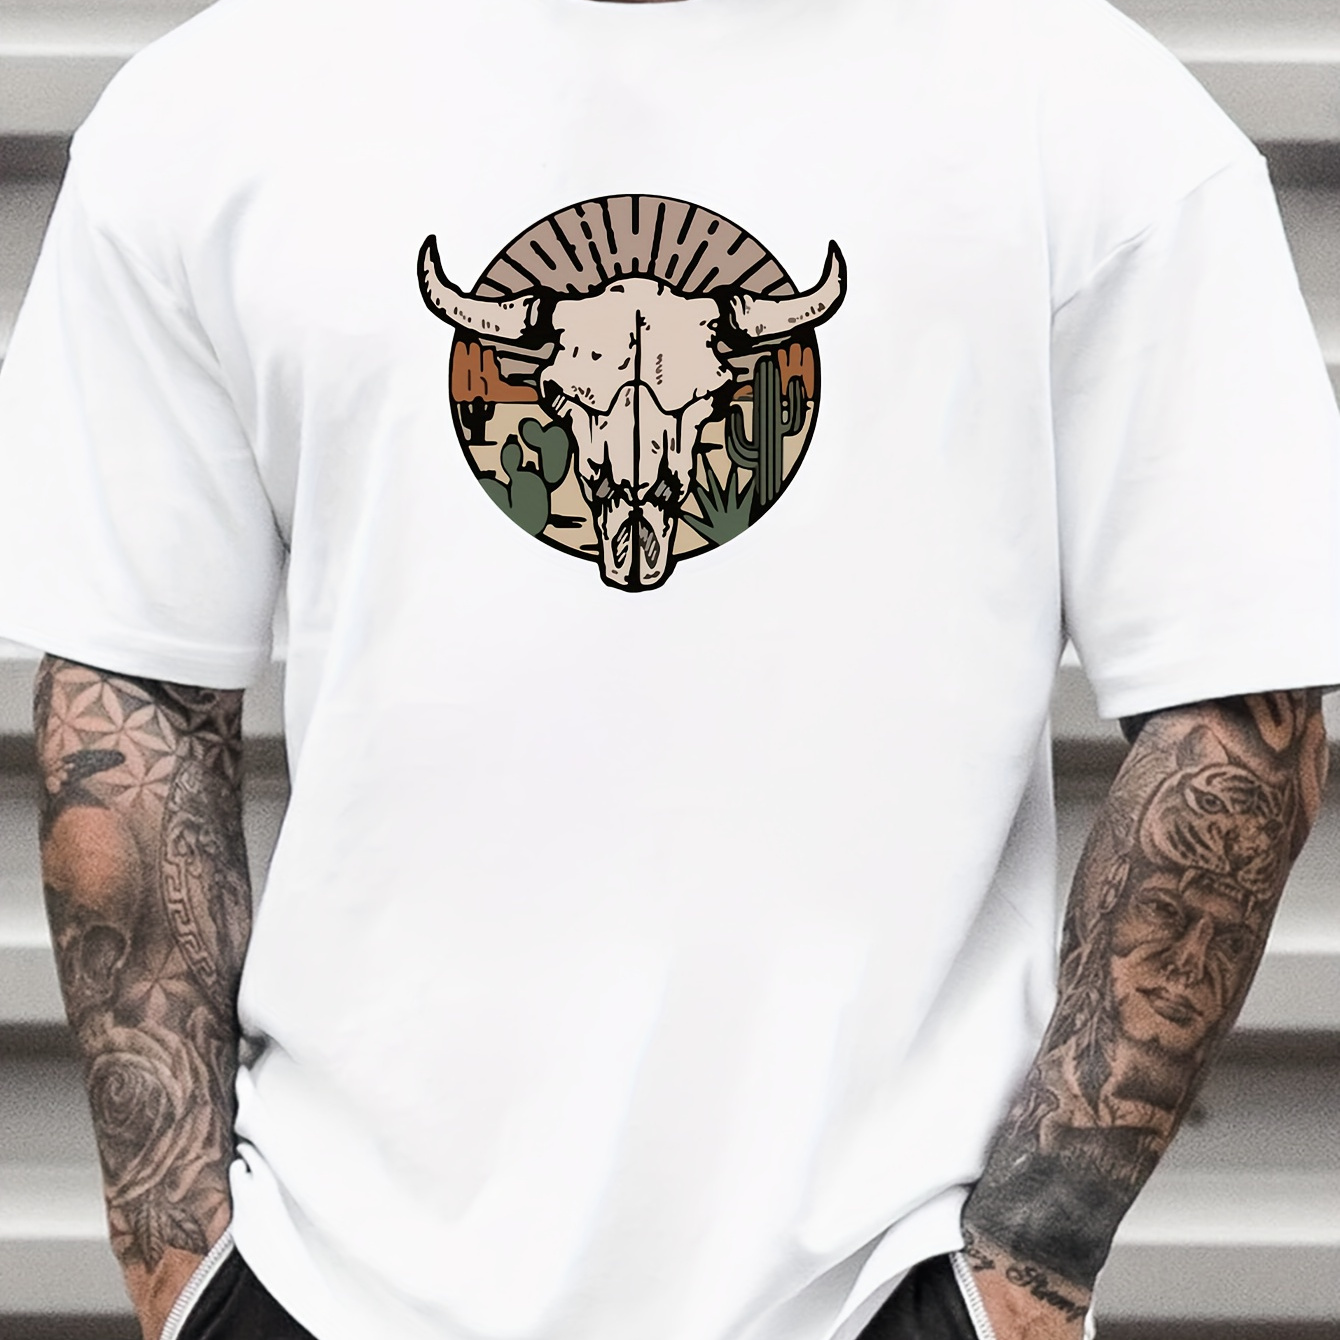 

Men's Pure Cotton T-shirt, Western Cow Head Print Short Sleeve Crew Neck Tees For Summer, Casual Outdoor Comfy Clothing For Male